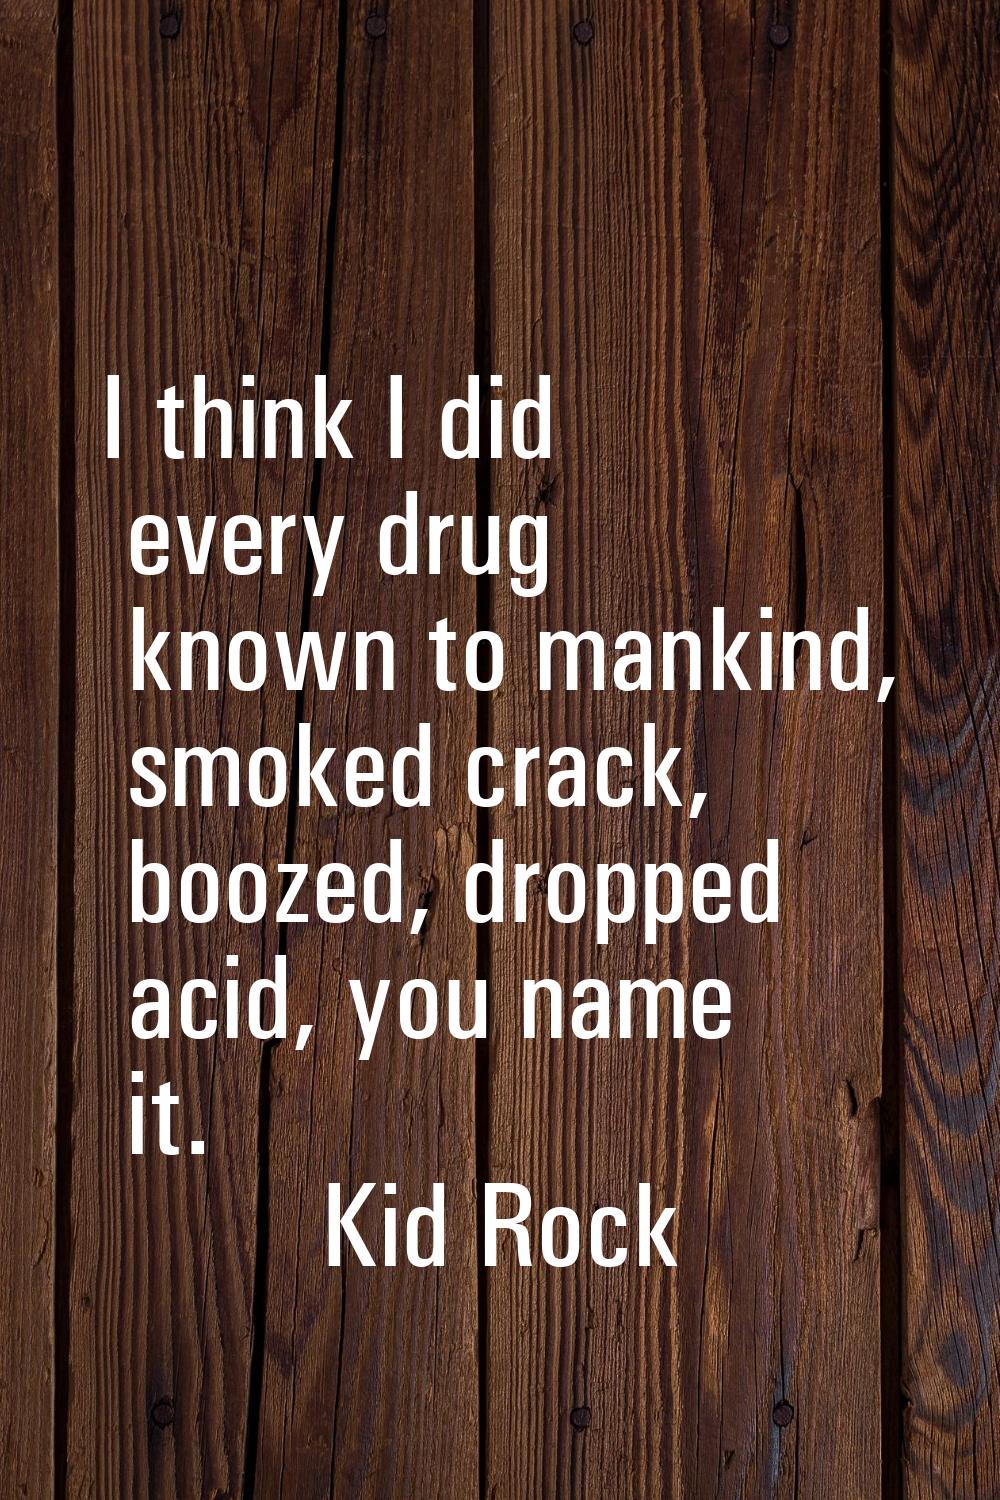 I think I did every drug known to mankind, smoked crack, boozed, dropped acid, you name it.